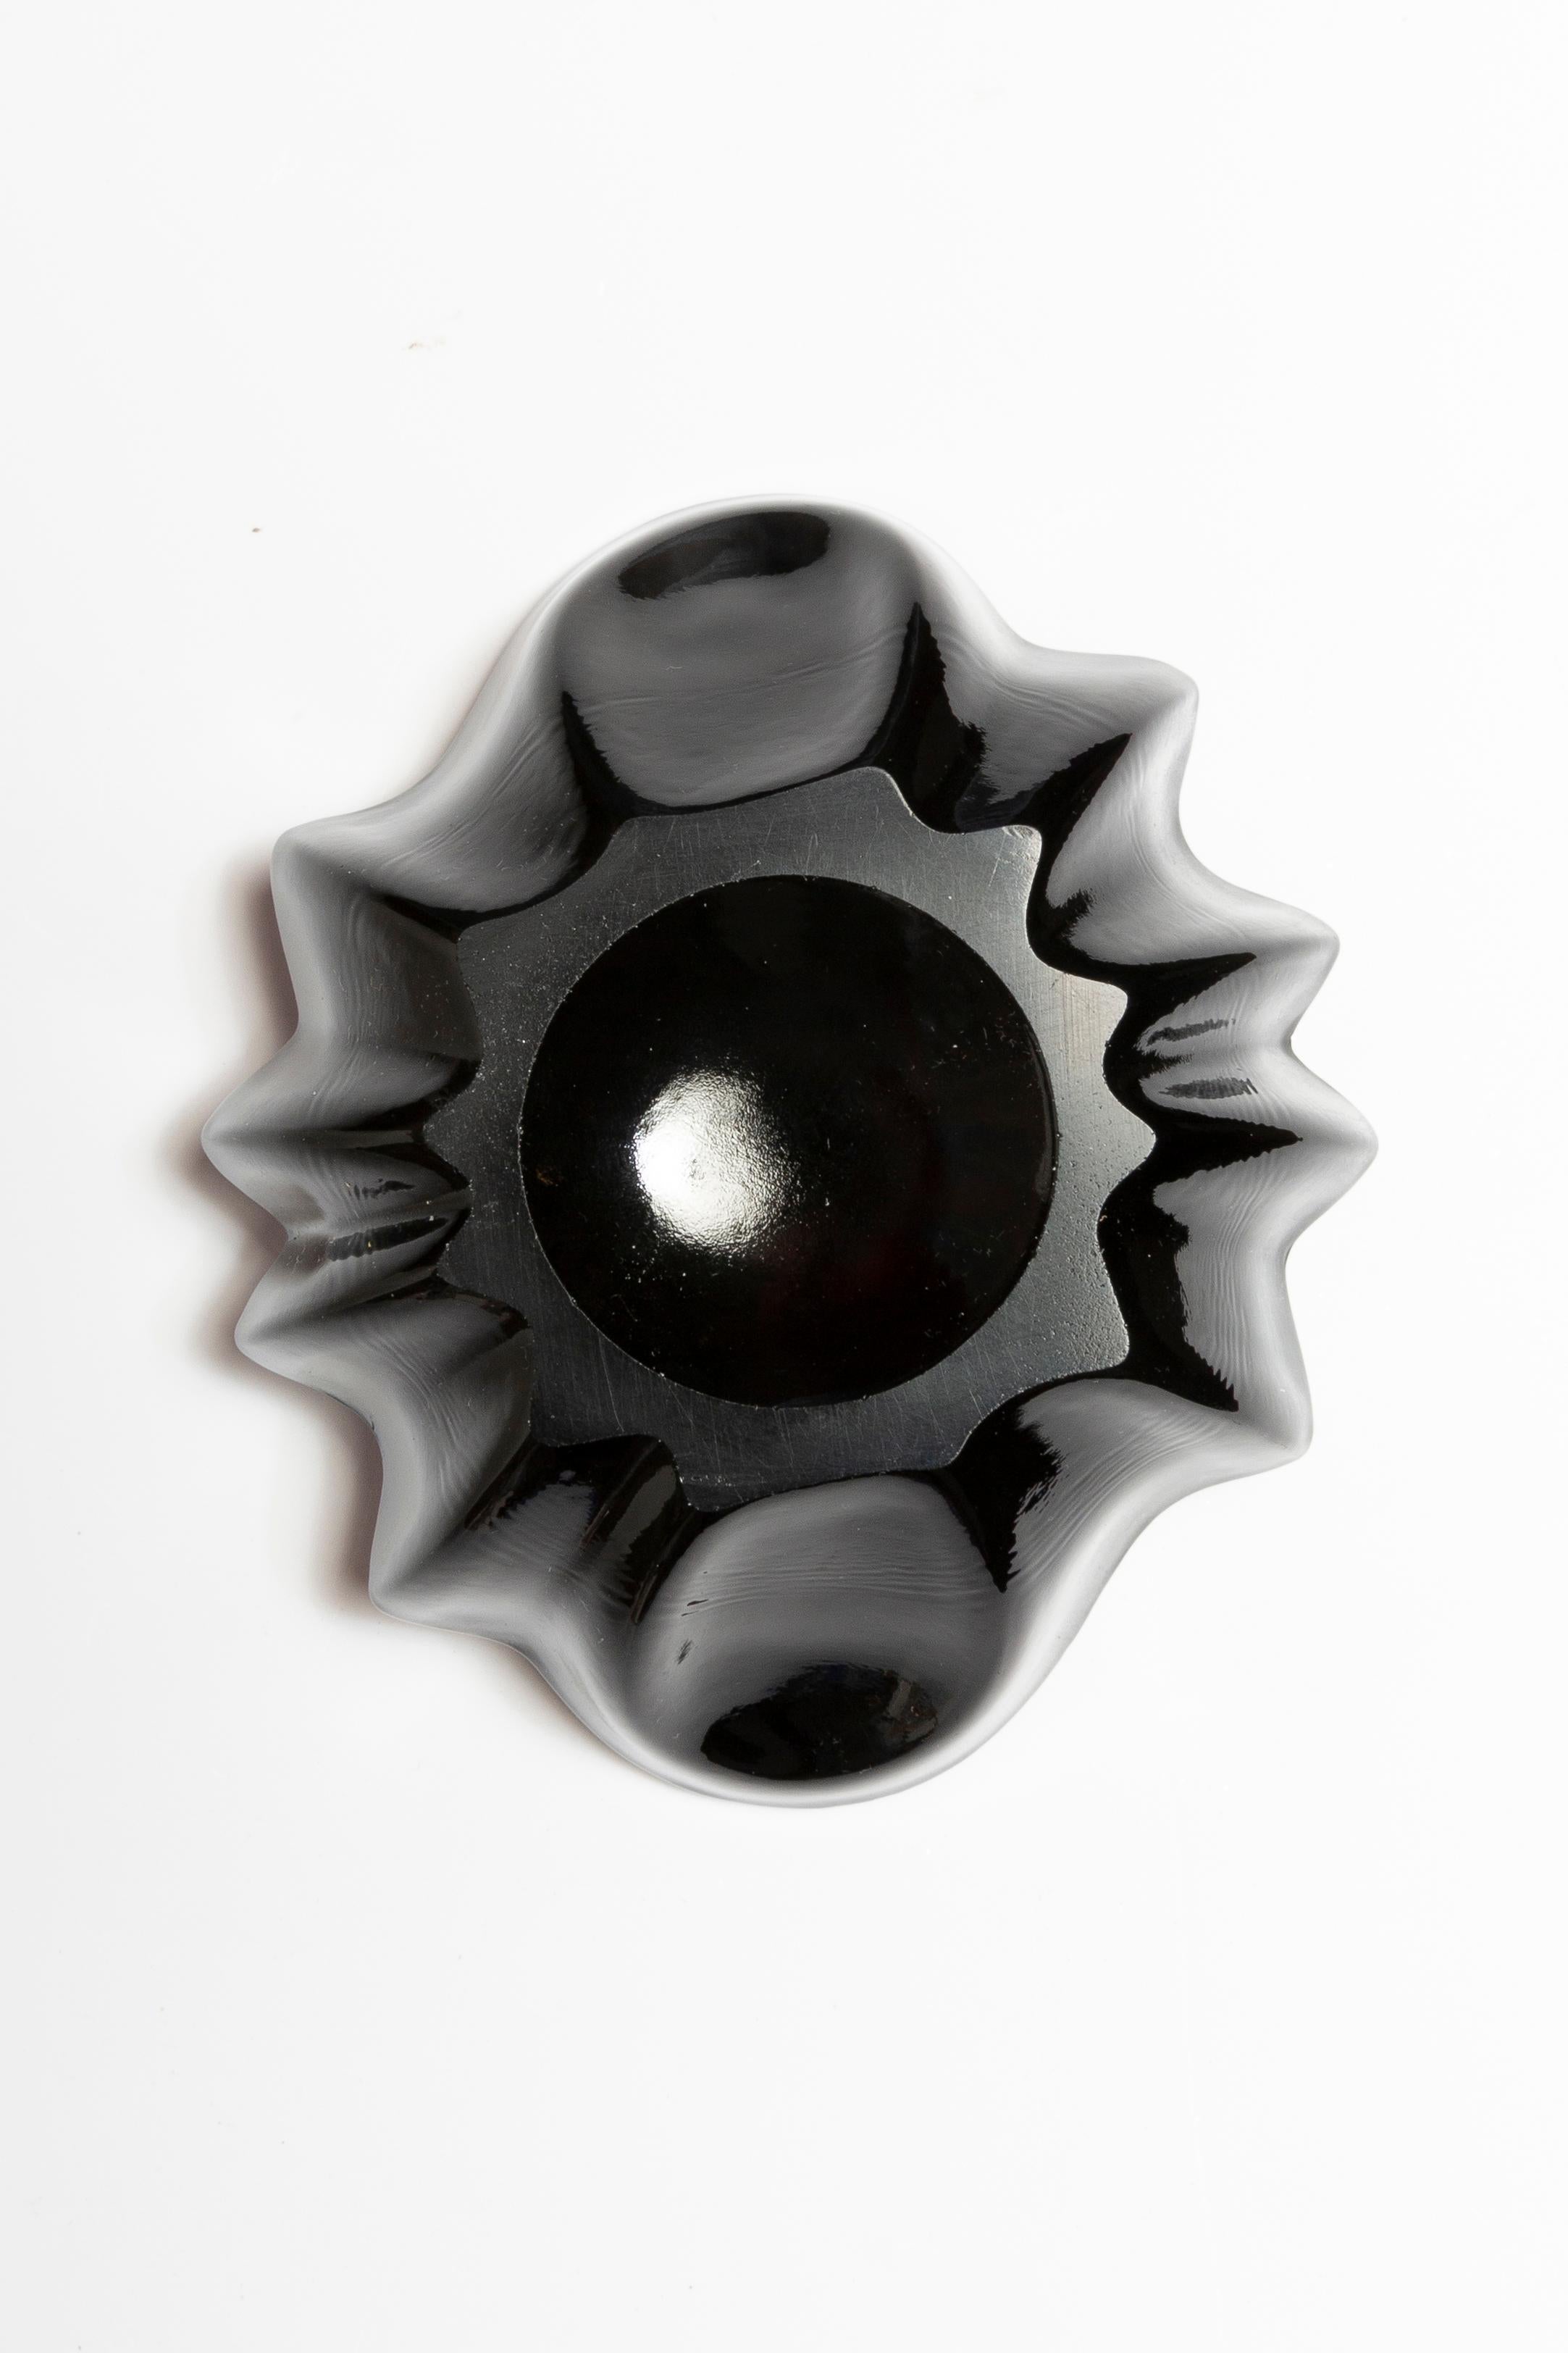 Mid Century Black Small Glass Bowl Ashtray Element, Italy, 1970s For Sale 1